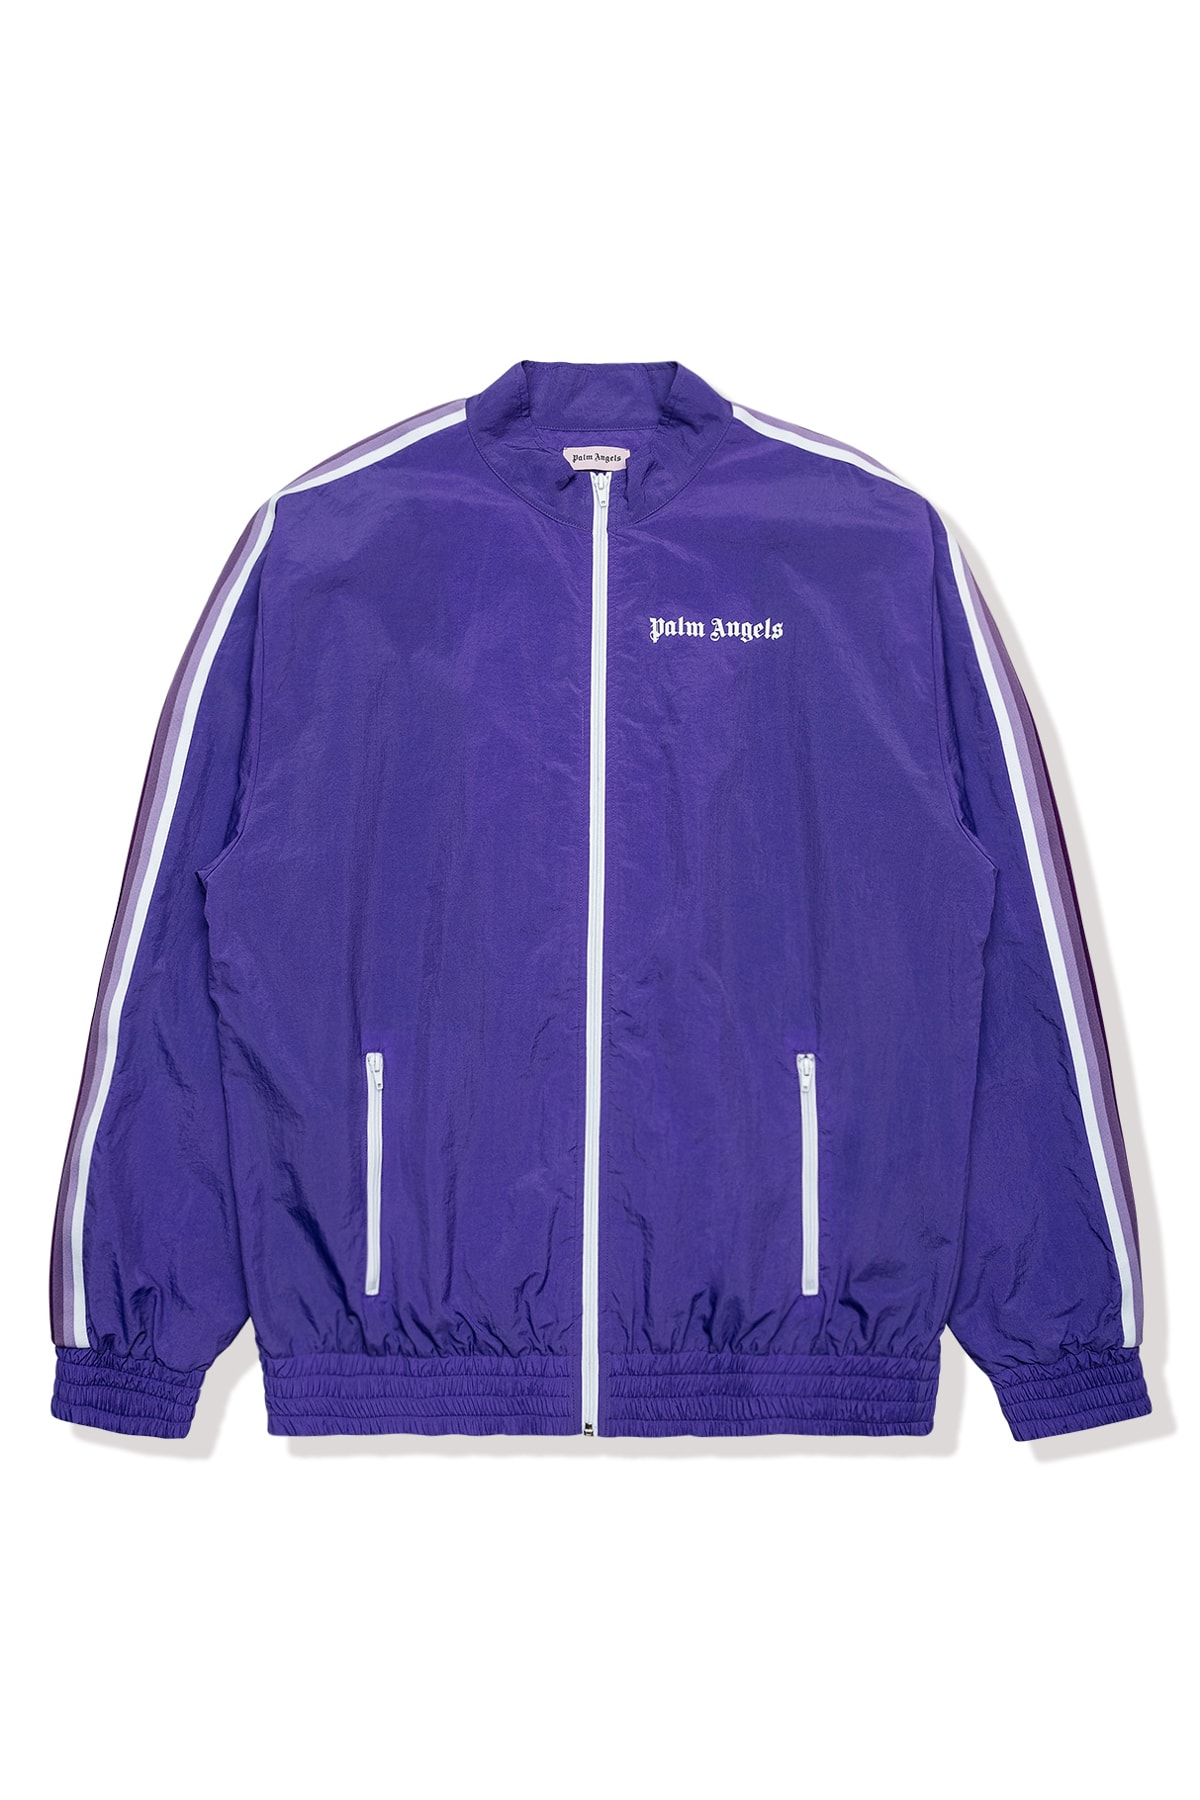 PURPLE TRACK JACKET in purple - Palm Angels® Official